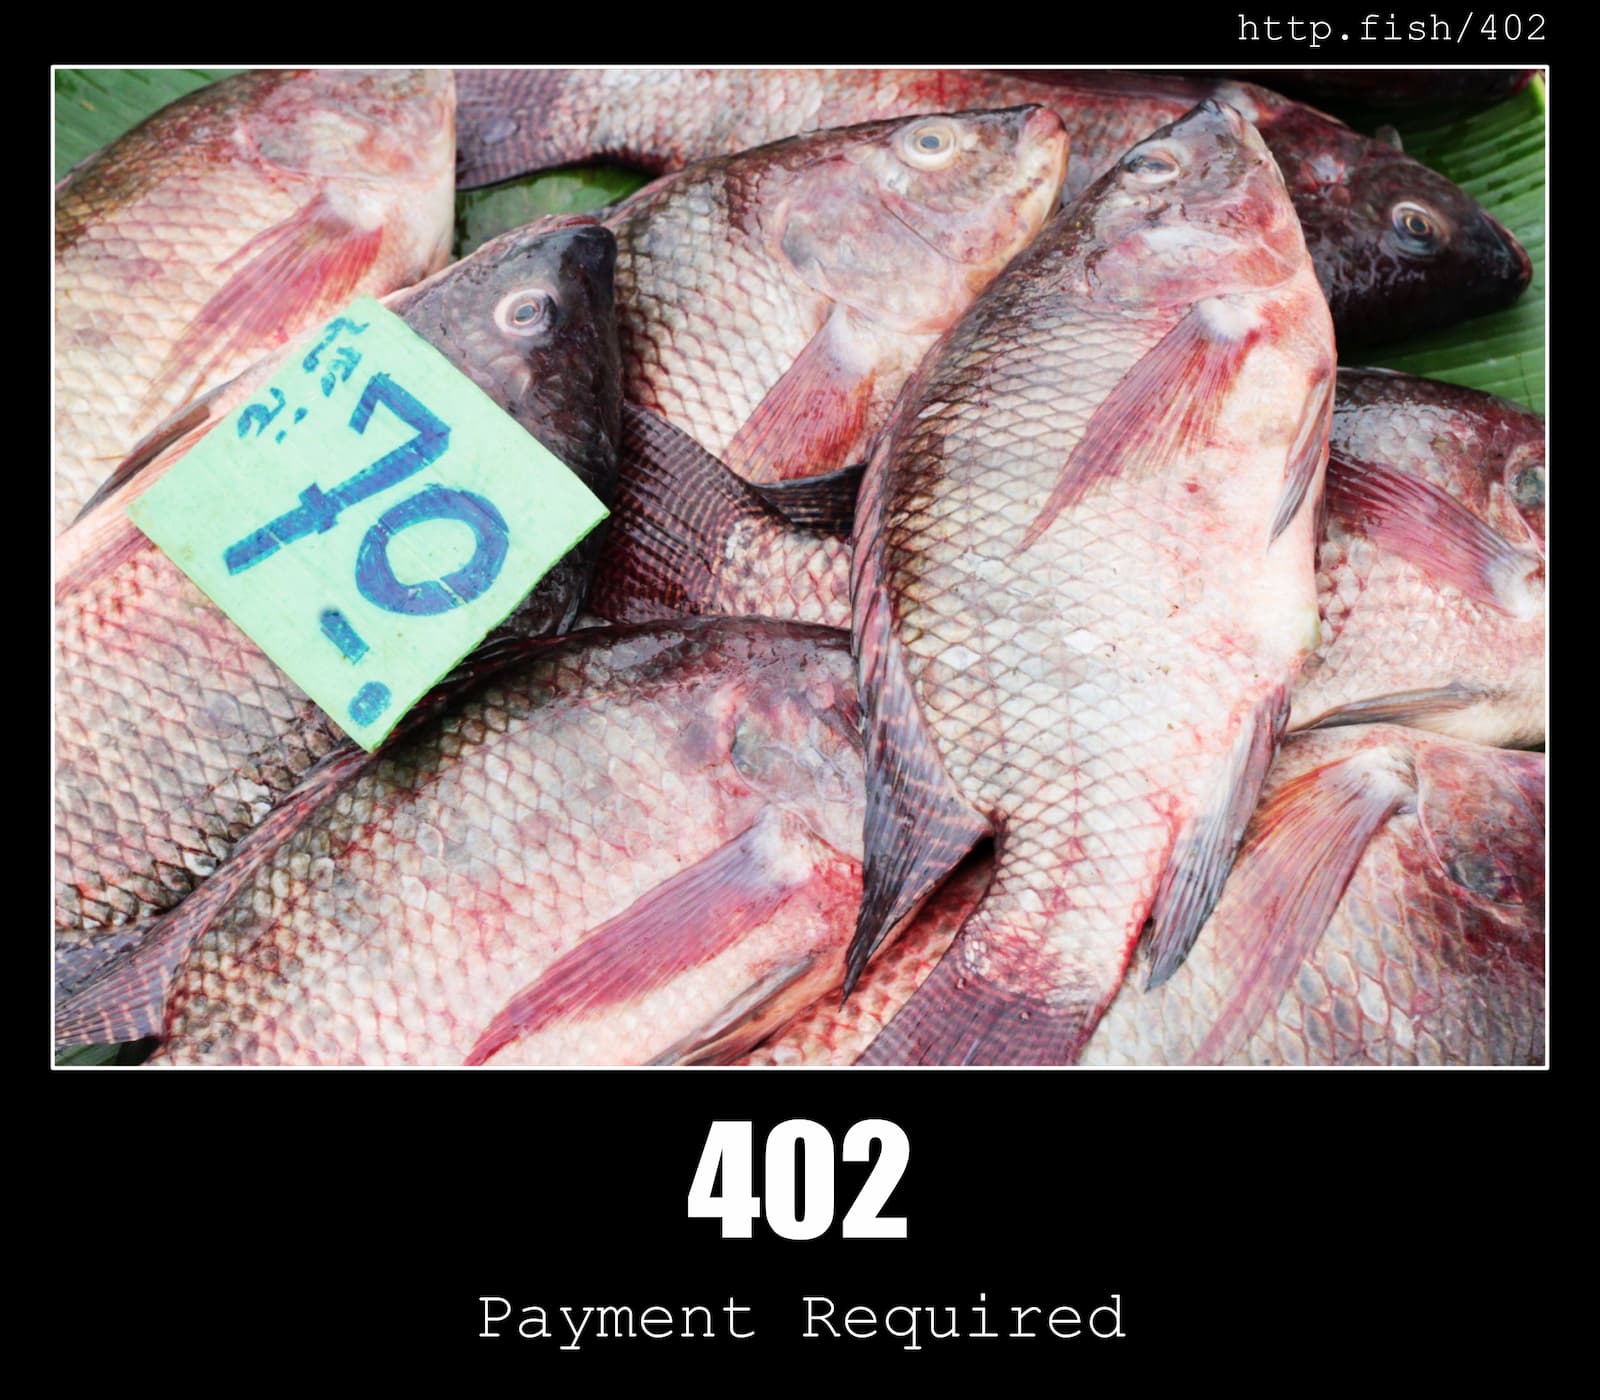 HTTP Status Code 402 Payment Required & Fish